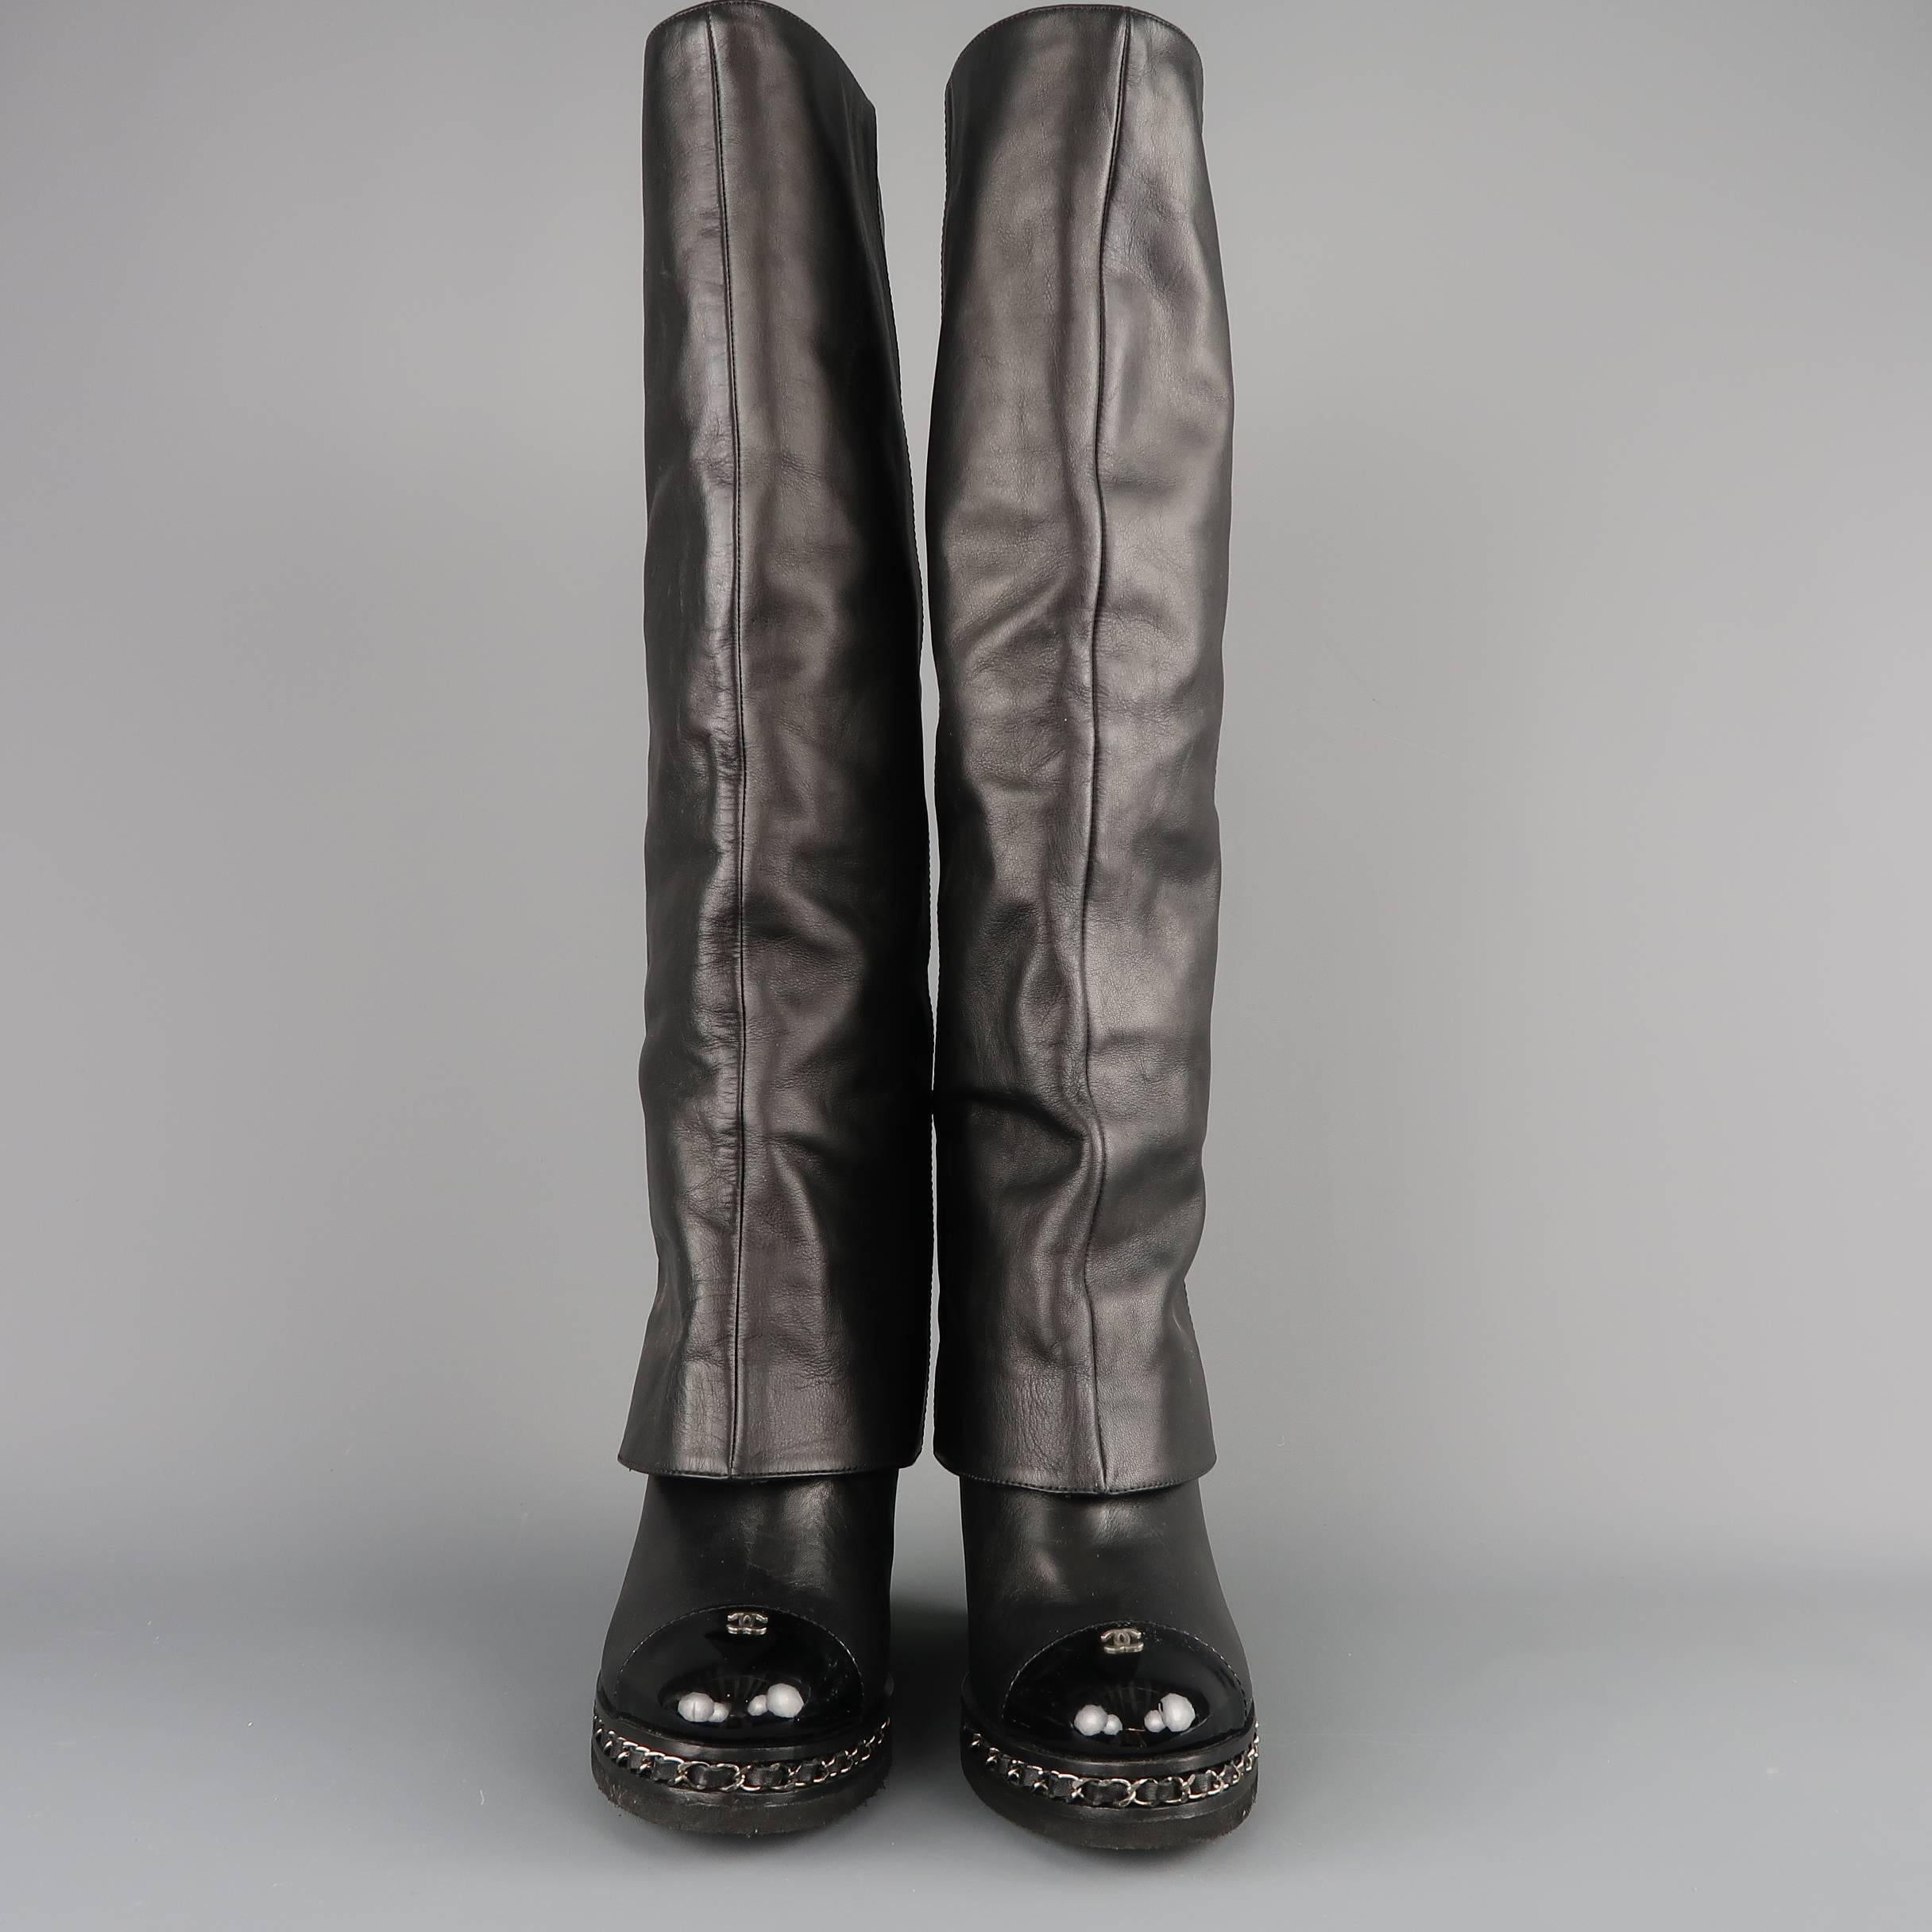 CHANEL knee high boots come in smooth black leather with a fold over shaft, patent leather cap toe with silver tone CC, and covered wedge with woven chain midsole. Vibram sole added. Made in Italy.  Retail: $2150.00

Good Pre-Owned